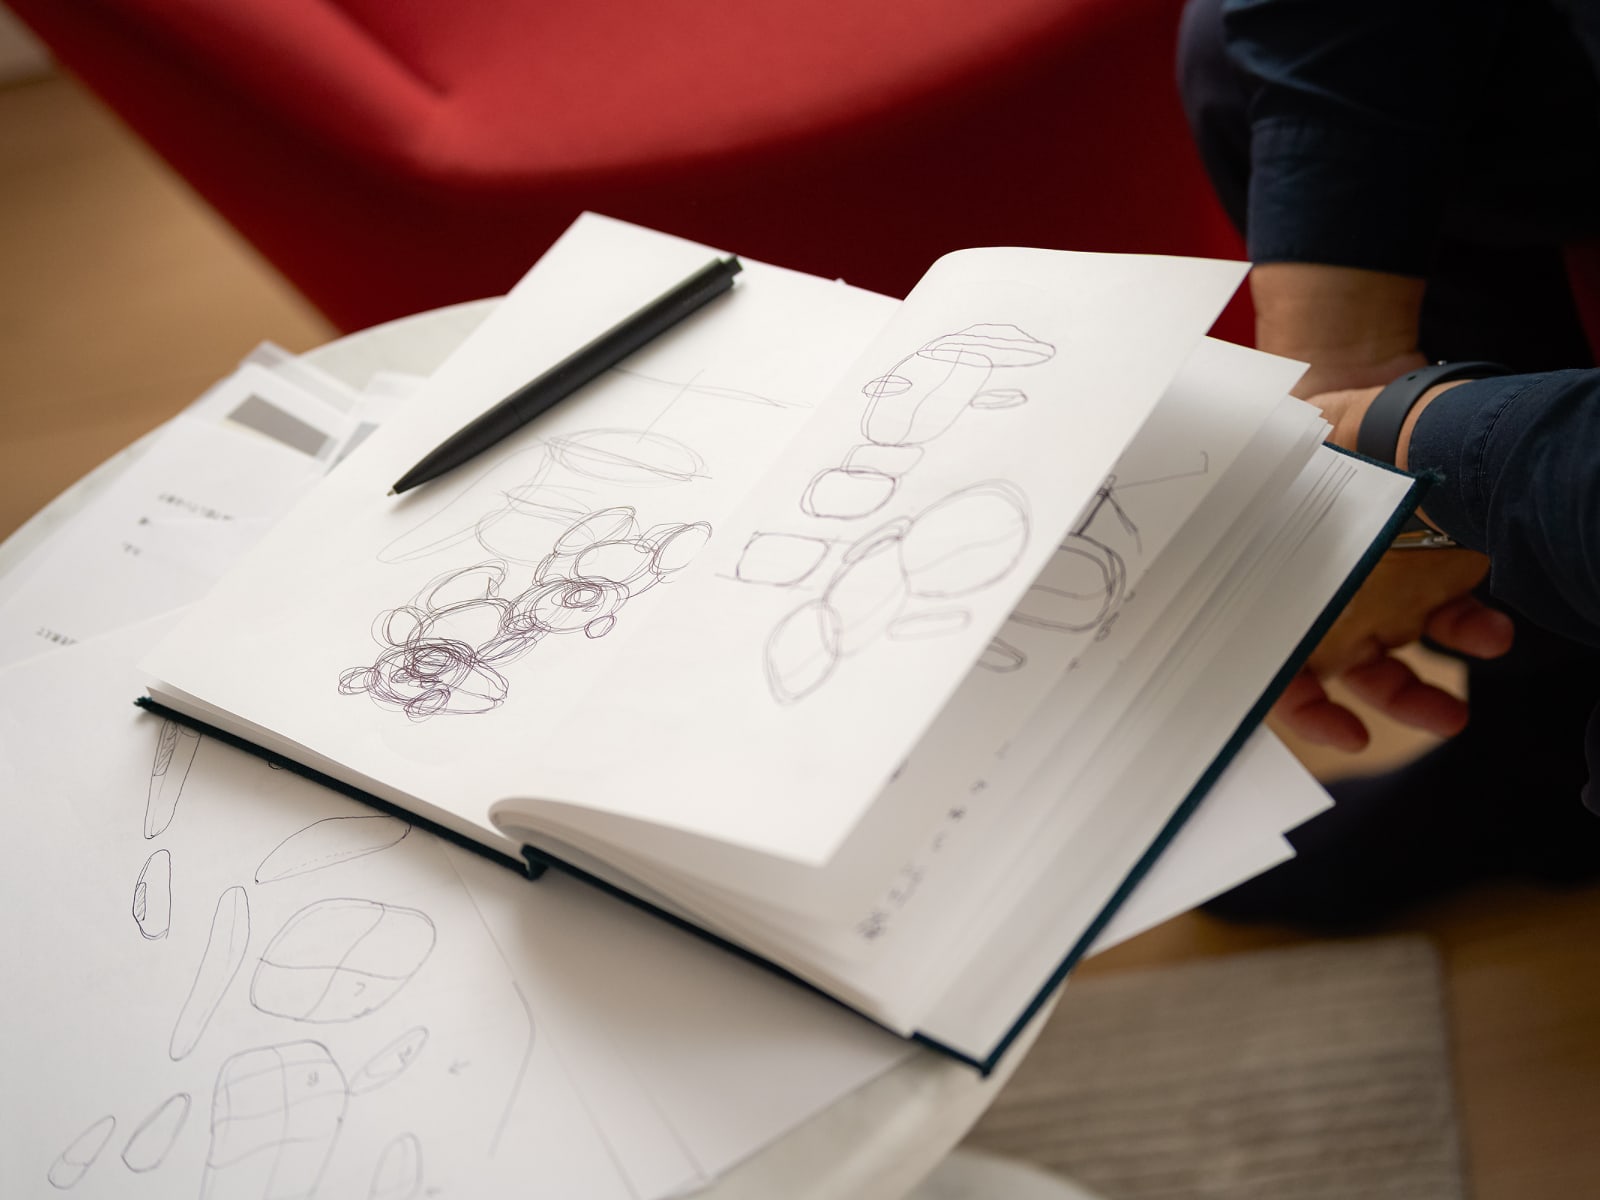 A sketch book from Naoto Fukasawa open to a page with designs for the Asari chair.